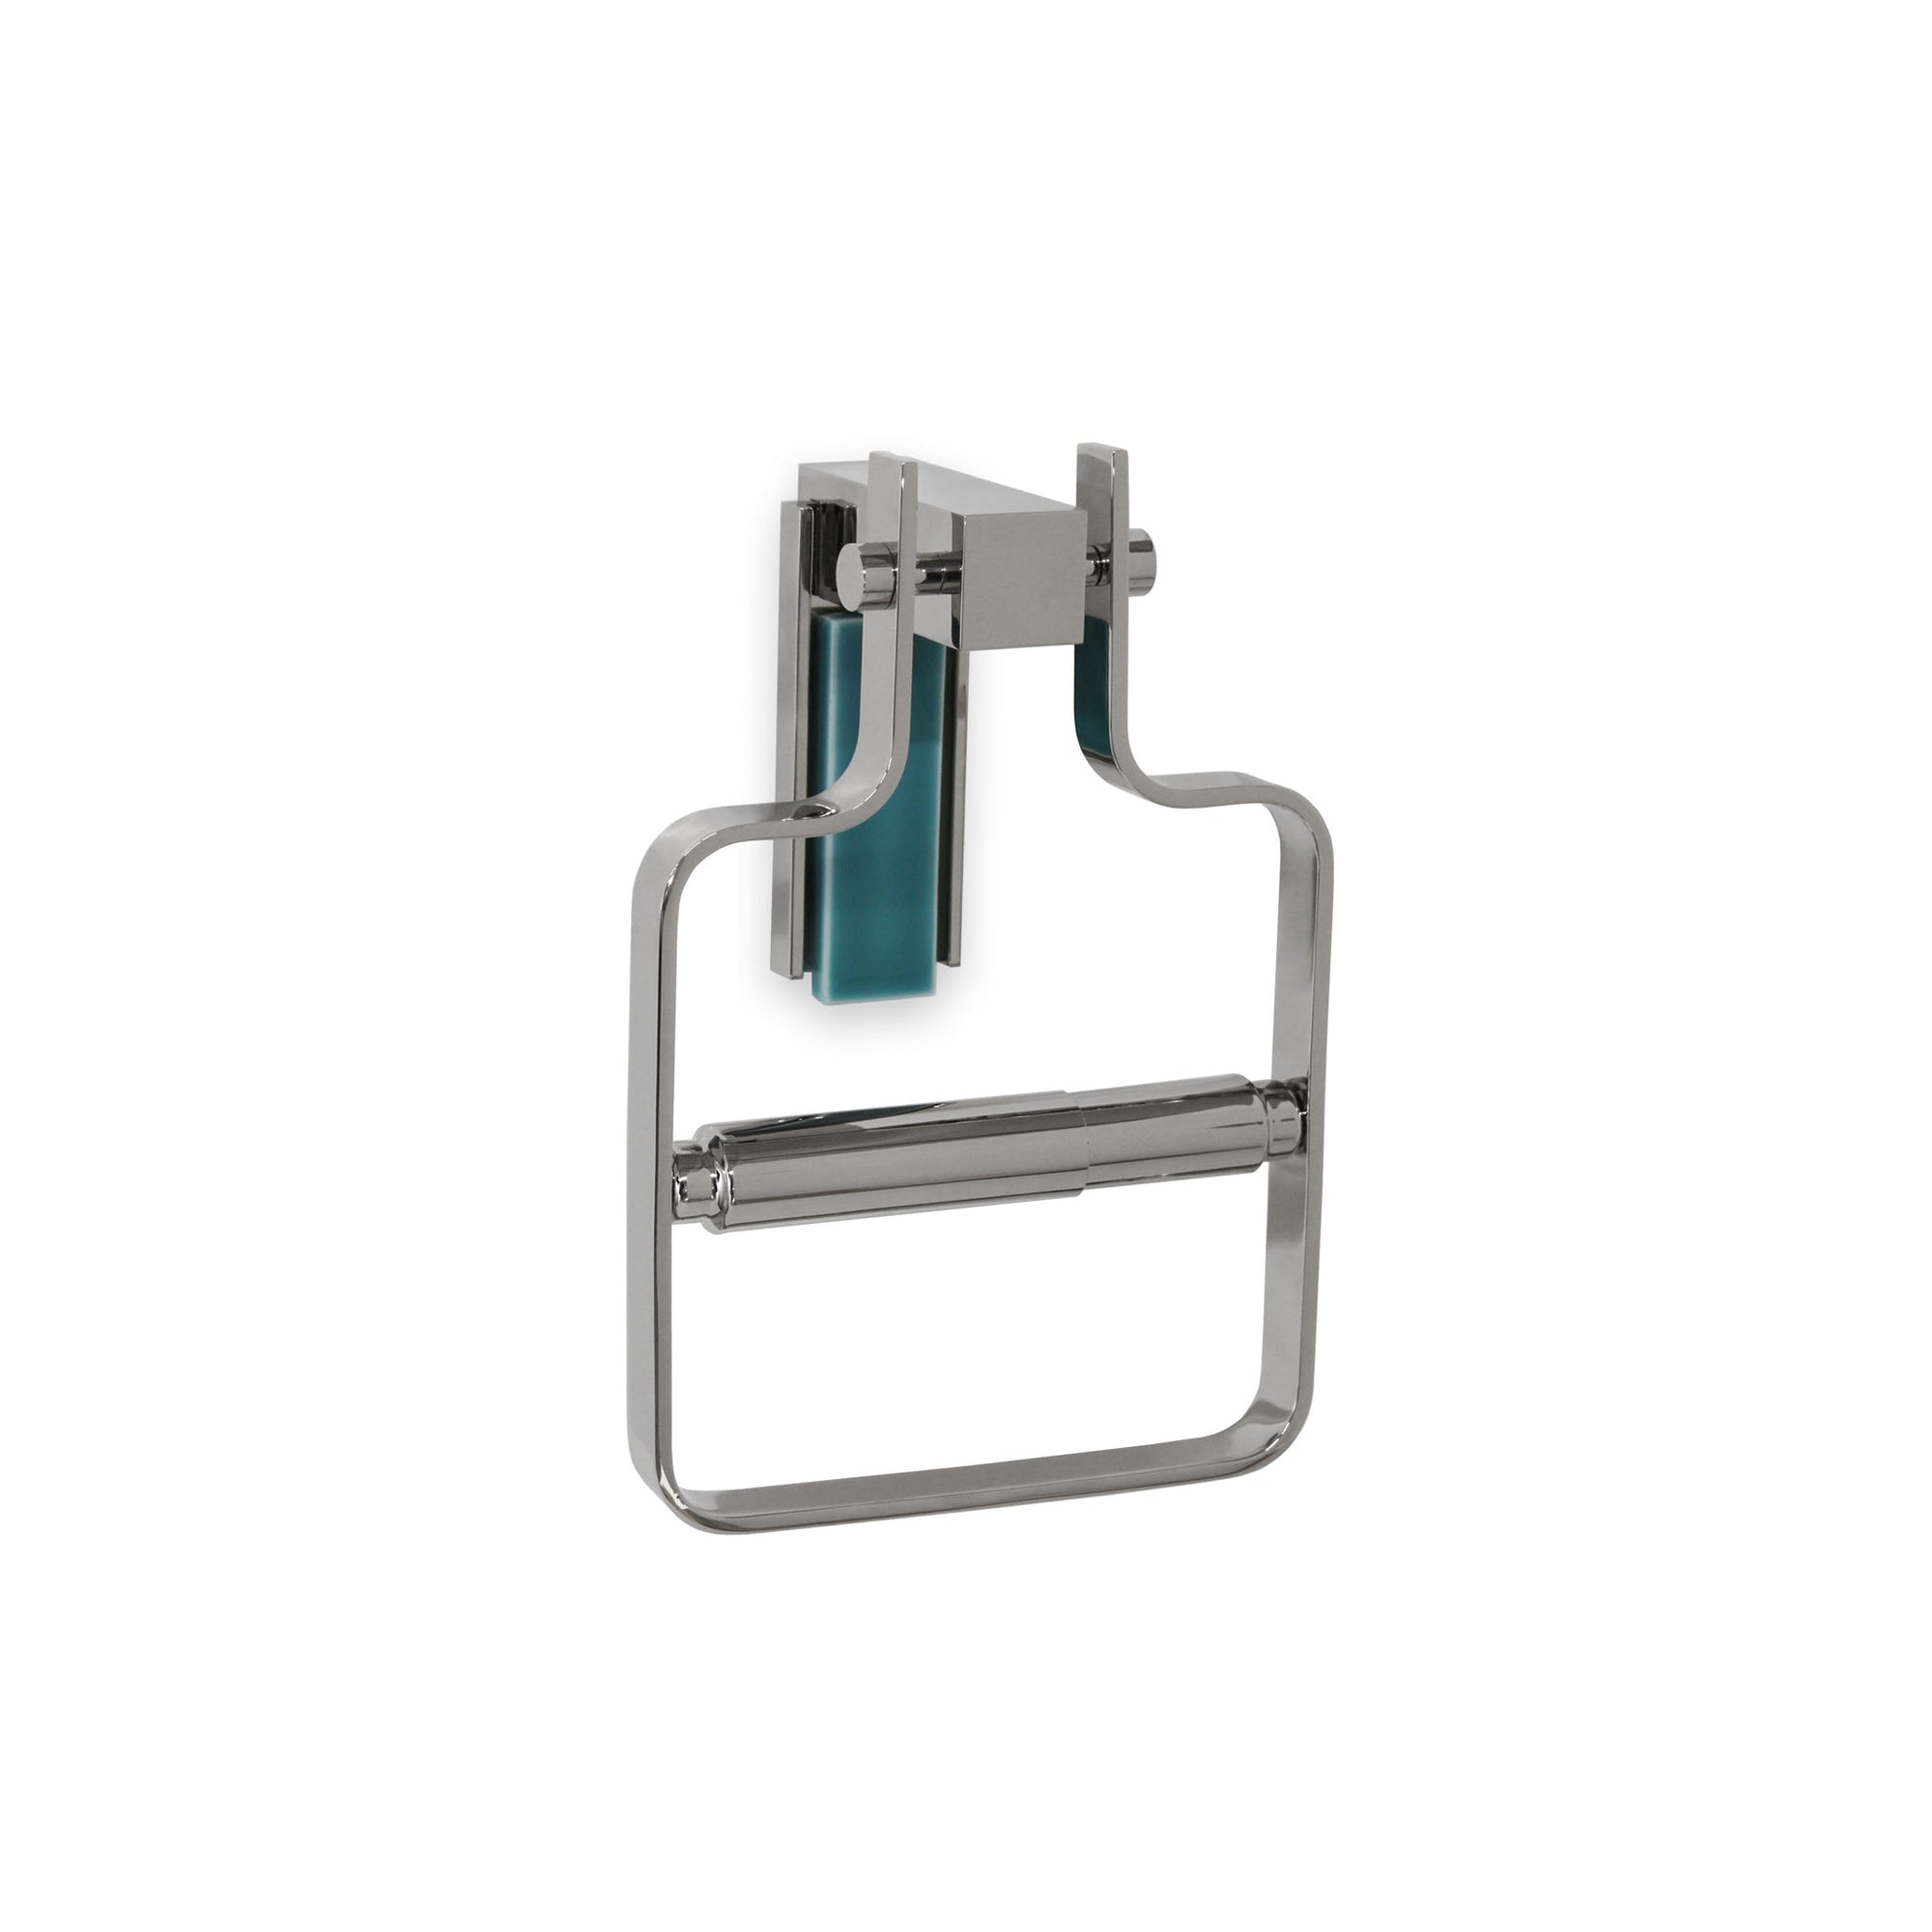 3457-BL01-PN Sherle Wagner International Apollo Paper Holder with Bermuda insert in Polished Nickel metal finish